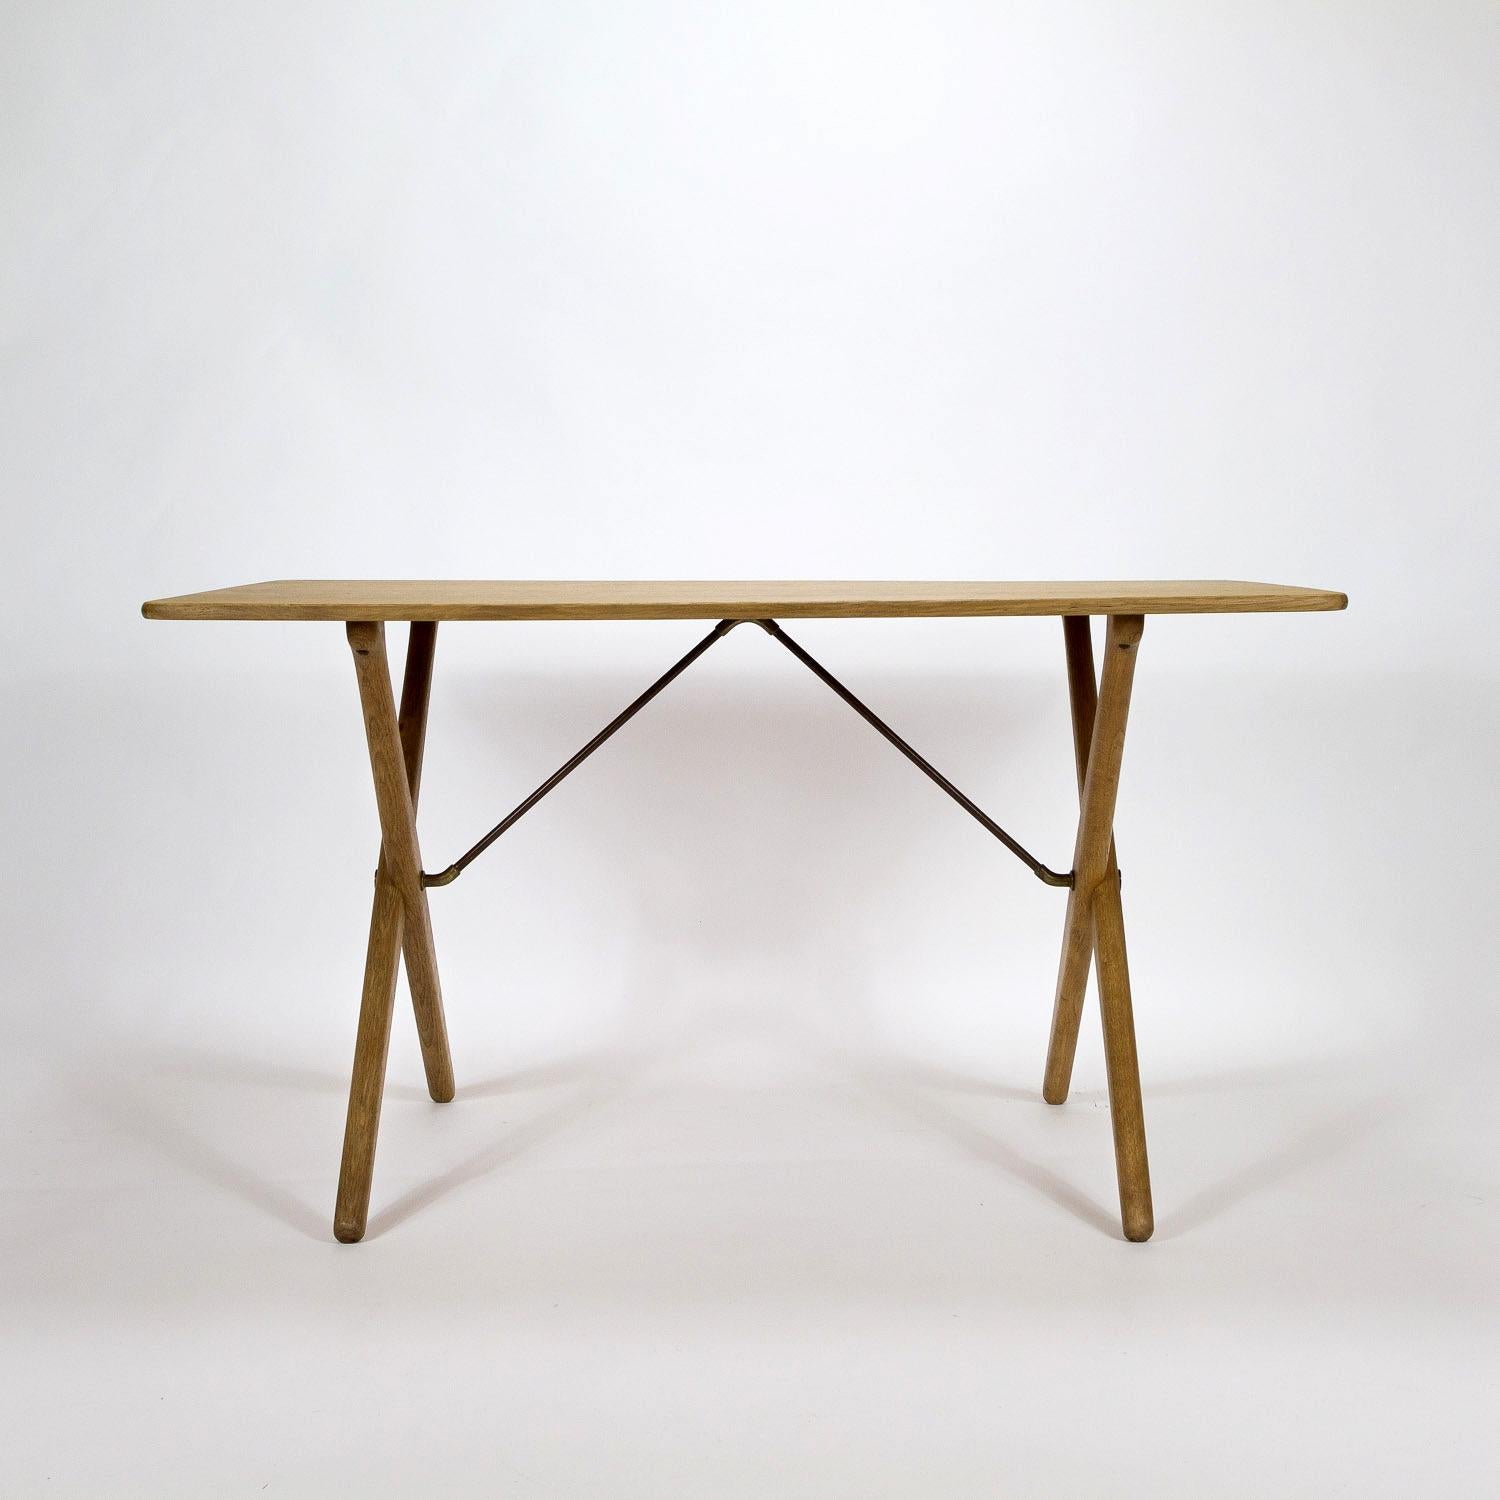 A fully restored midcentury cross-leg oak Model AT308 side table designed by Hans Wegner and made by Andreas Tuck in Denmark, 1950s. Brass and metal struts. New oak veneer on the table top and underside, we have kept the original designer’s and